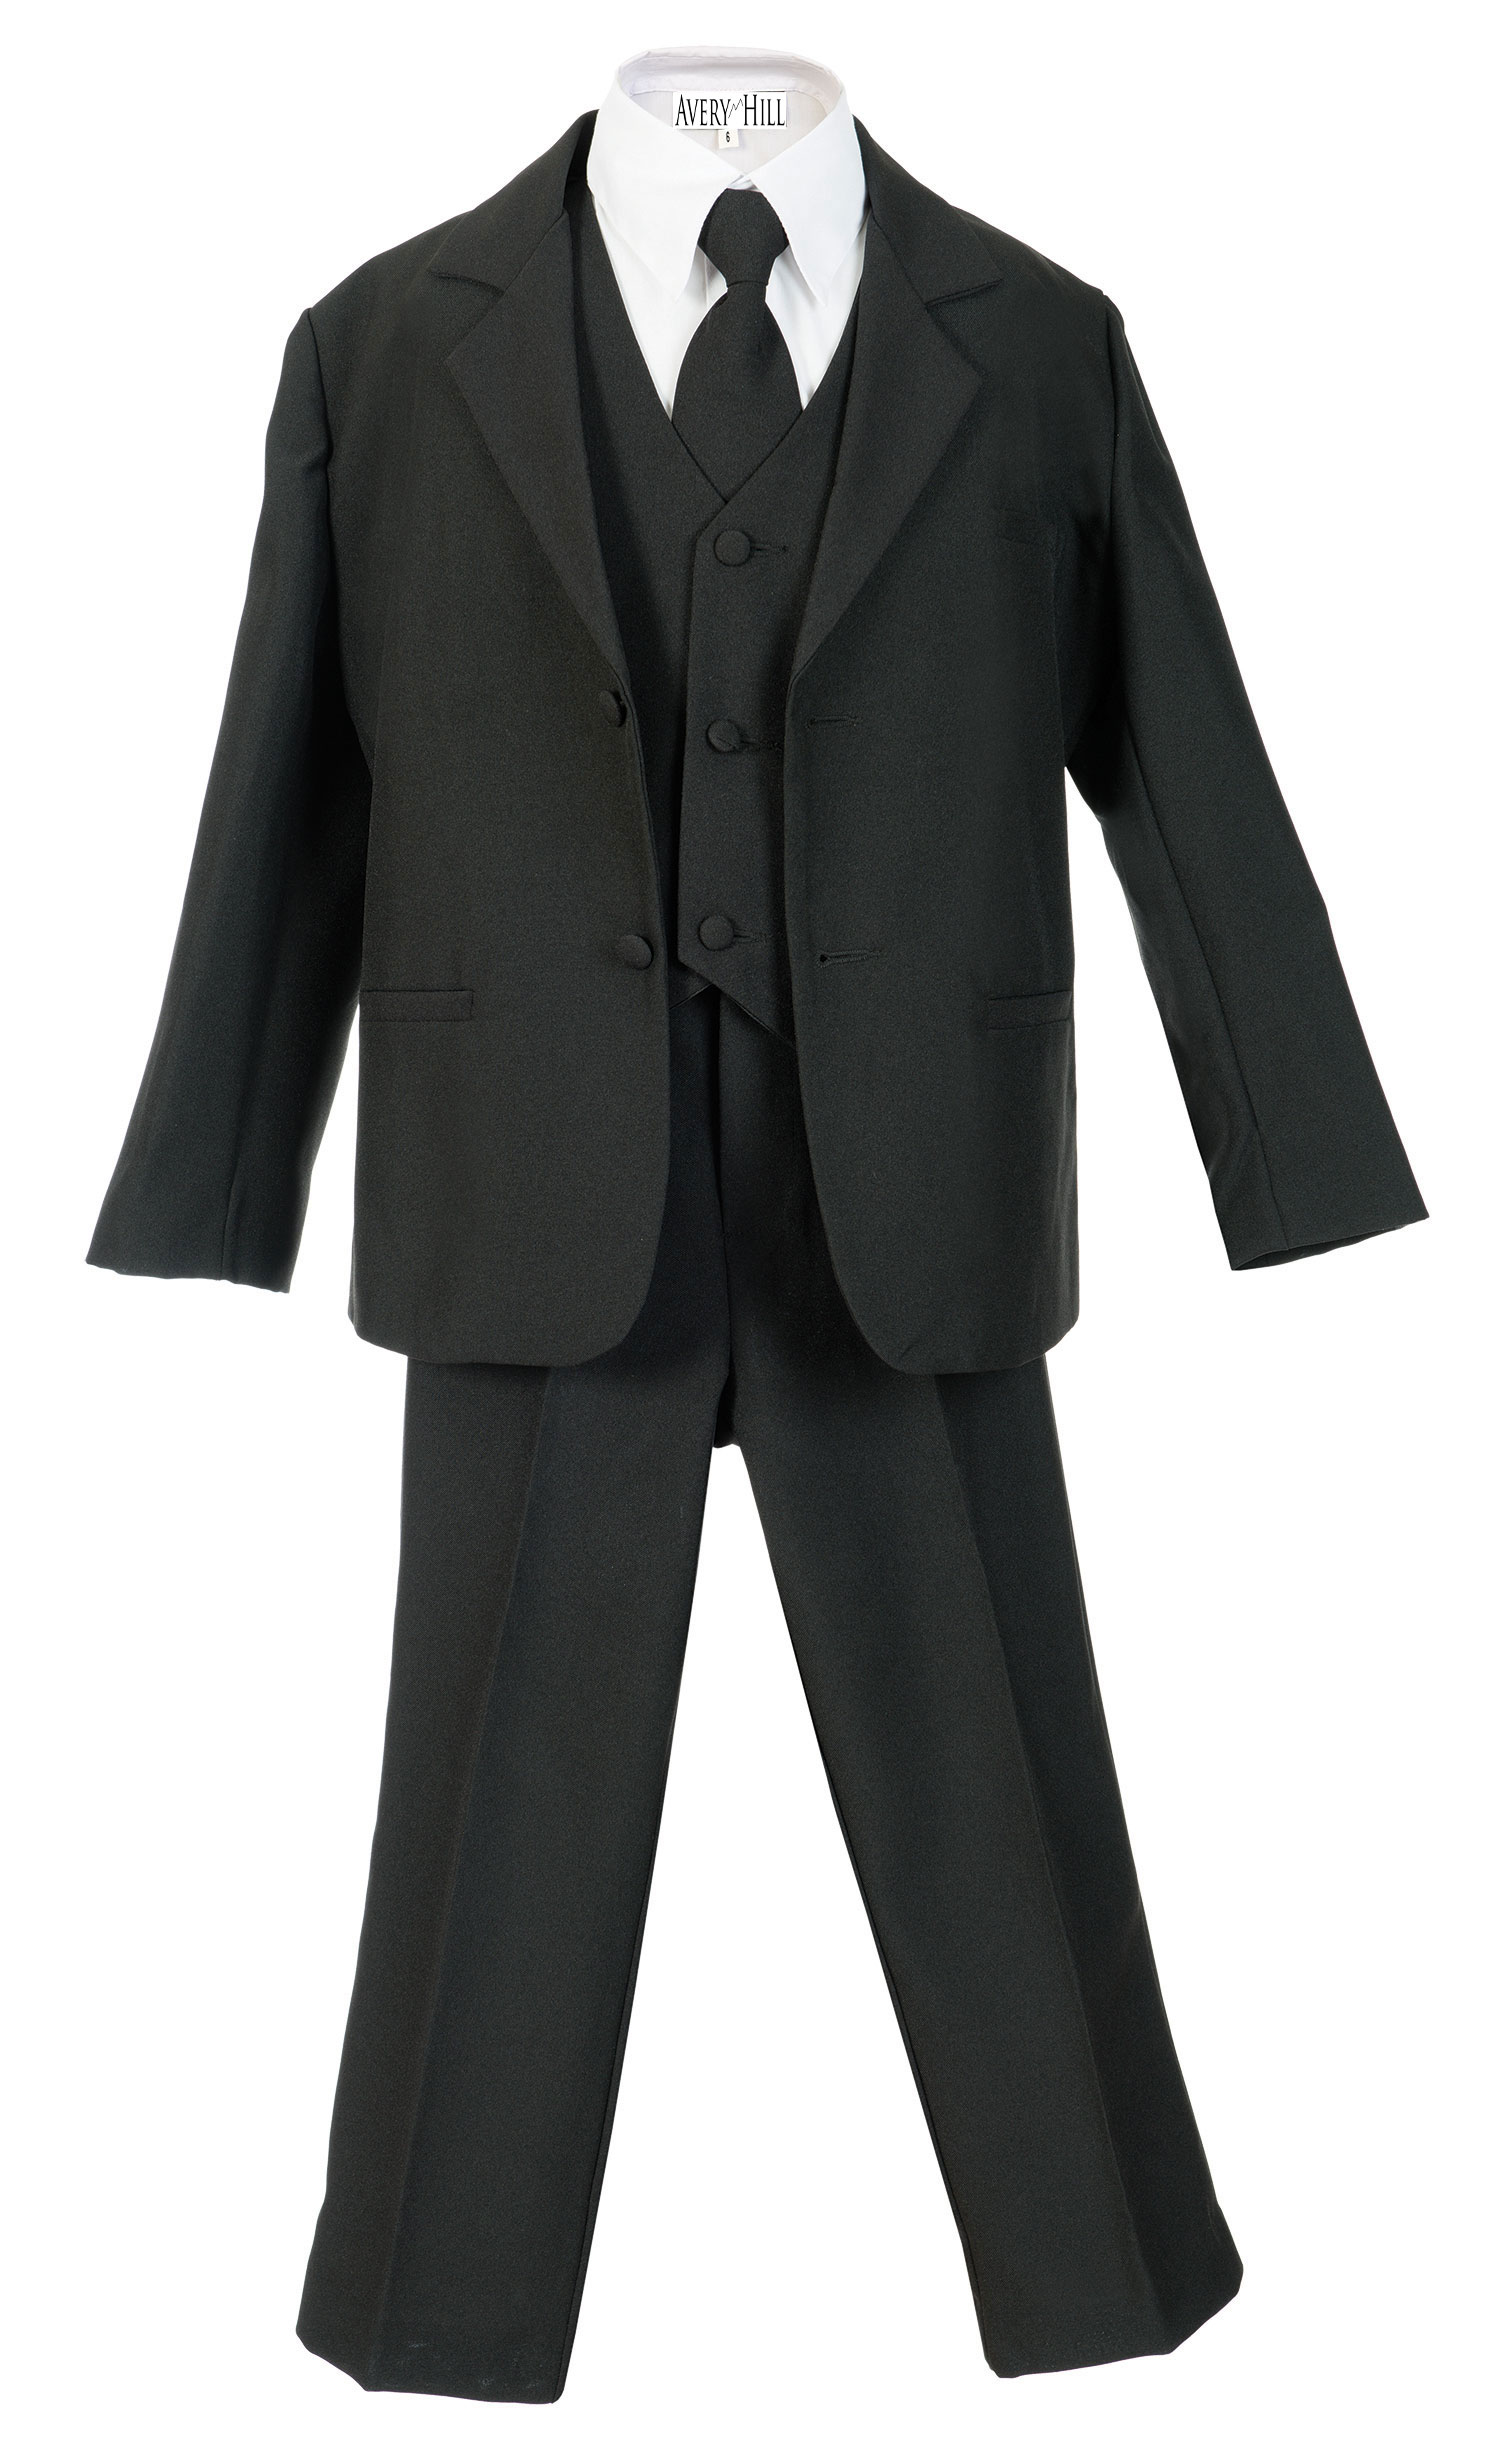 Avery Hill Boys Formal 5 Piece Suit with Shirt and Vest Black - 4T